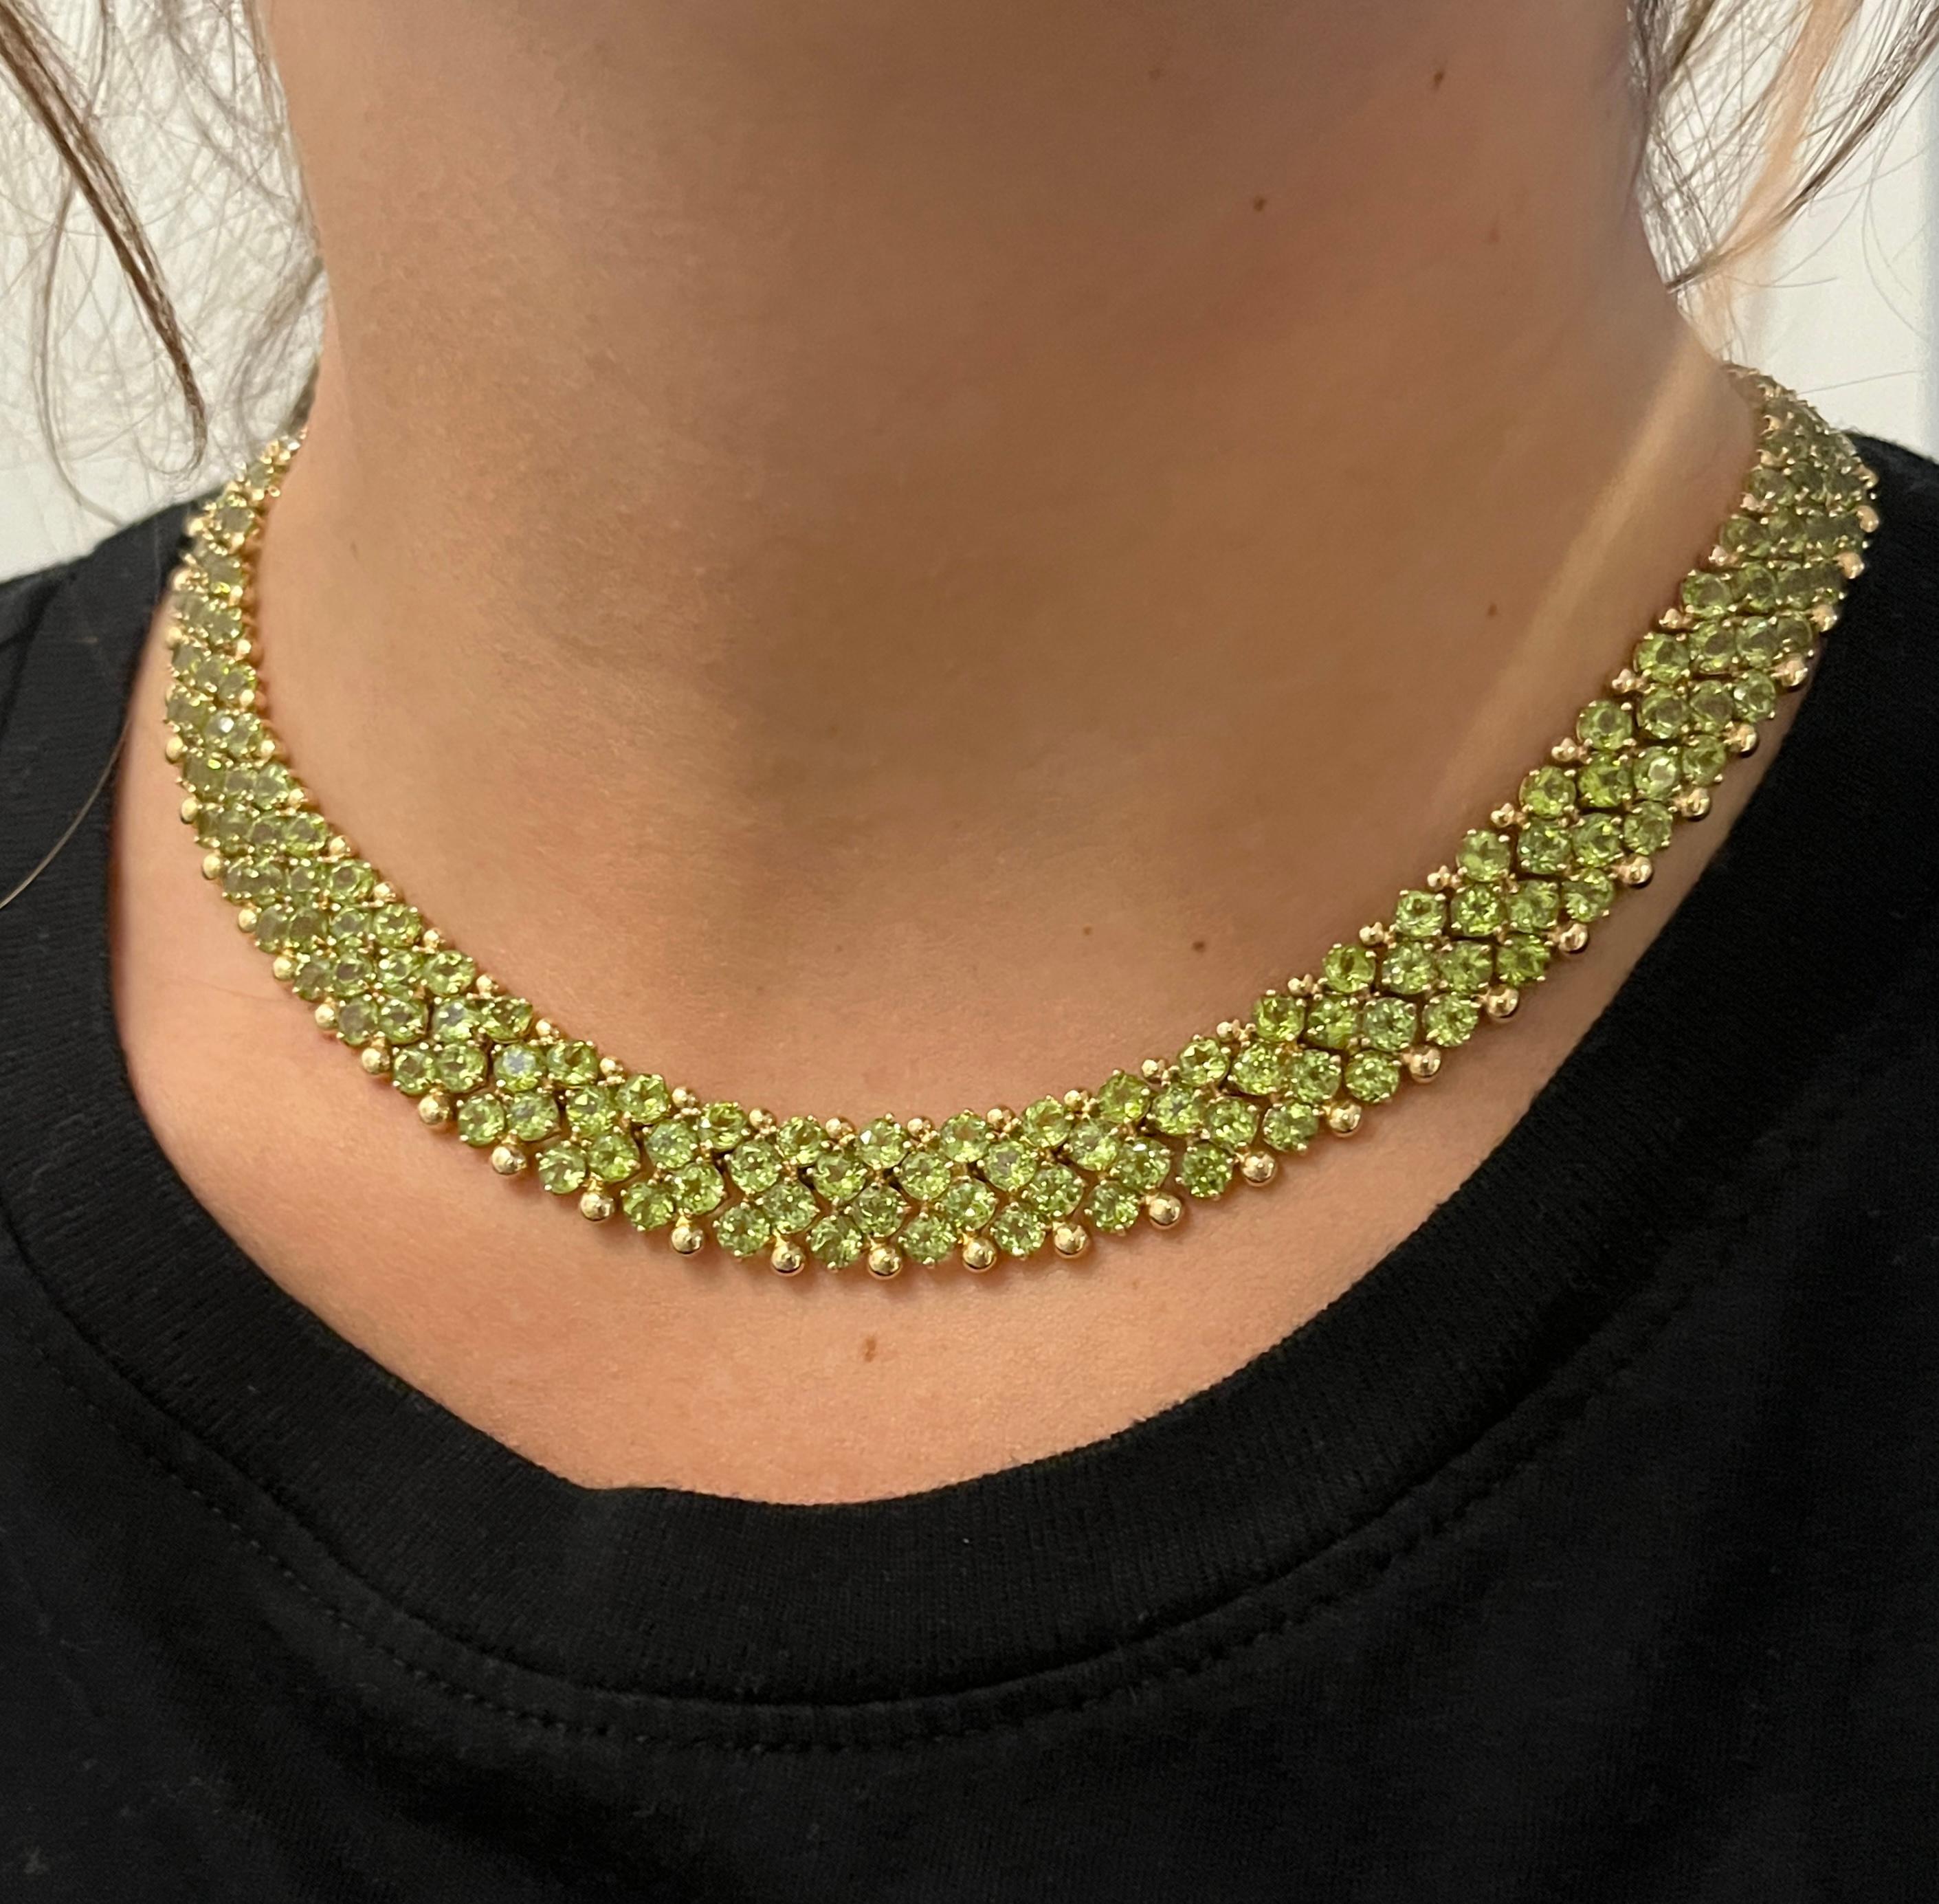 45 Carat Mixed Cut Green Peridot Cluster Choker Necklace in 14K Yellow Gold In New Condition For Sale In Miami, FL